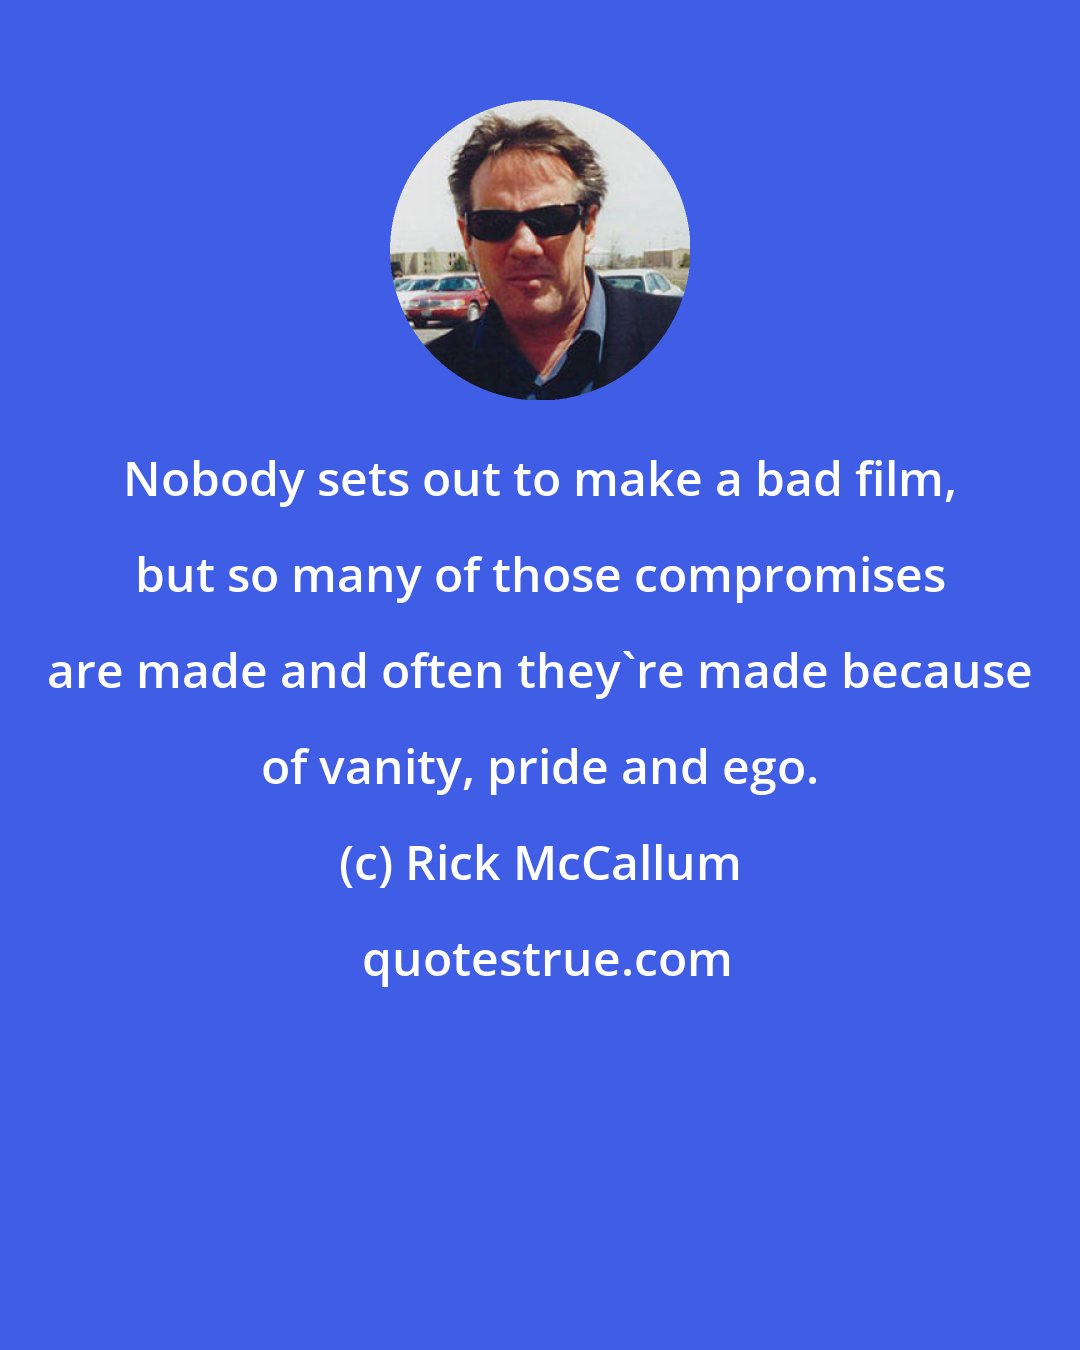 Rick McCallum: Nobody sets out to make a bad film, but so many of those compromises are made and often they're made because of vanity, pride and ego.